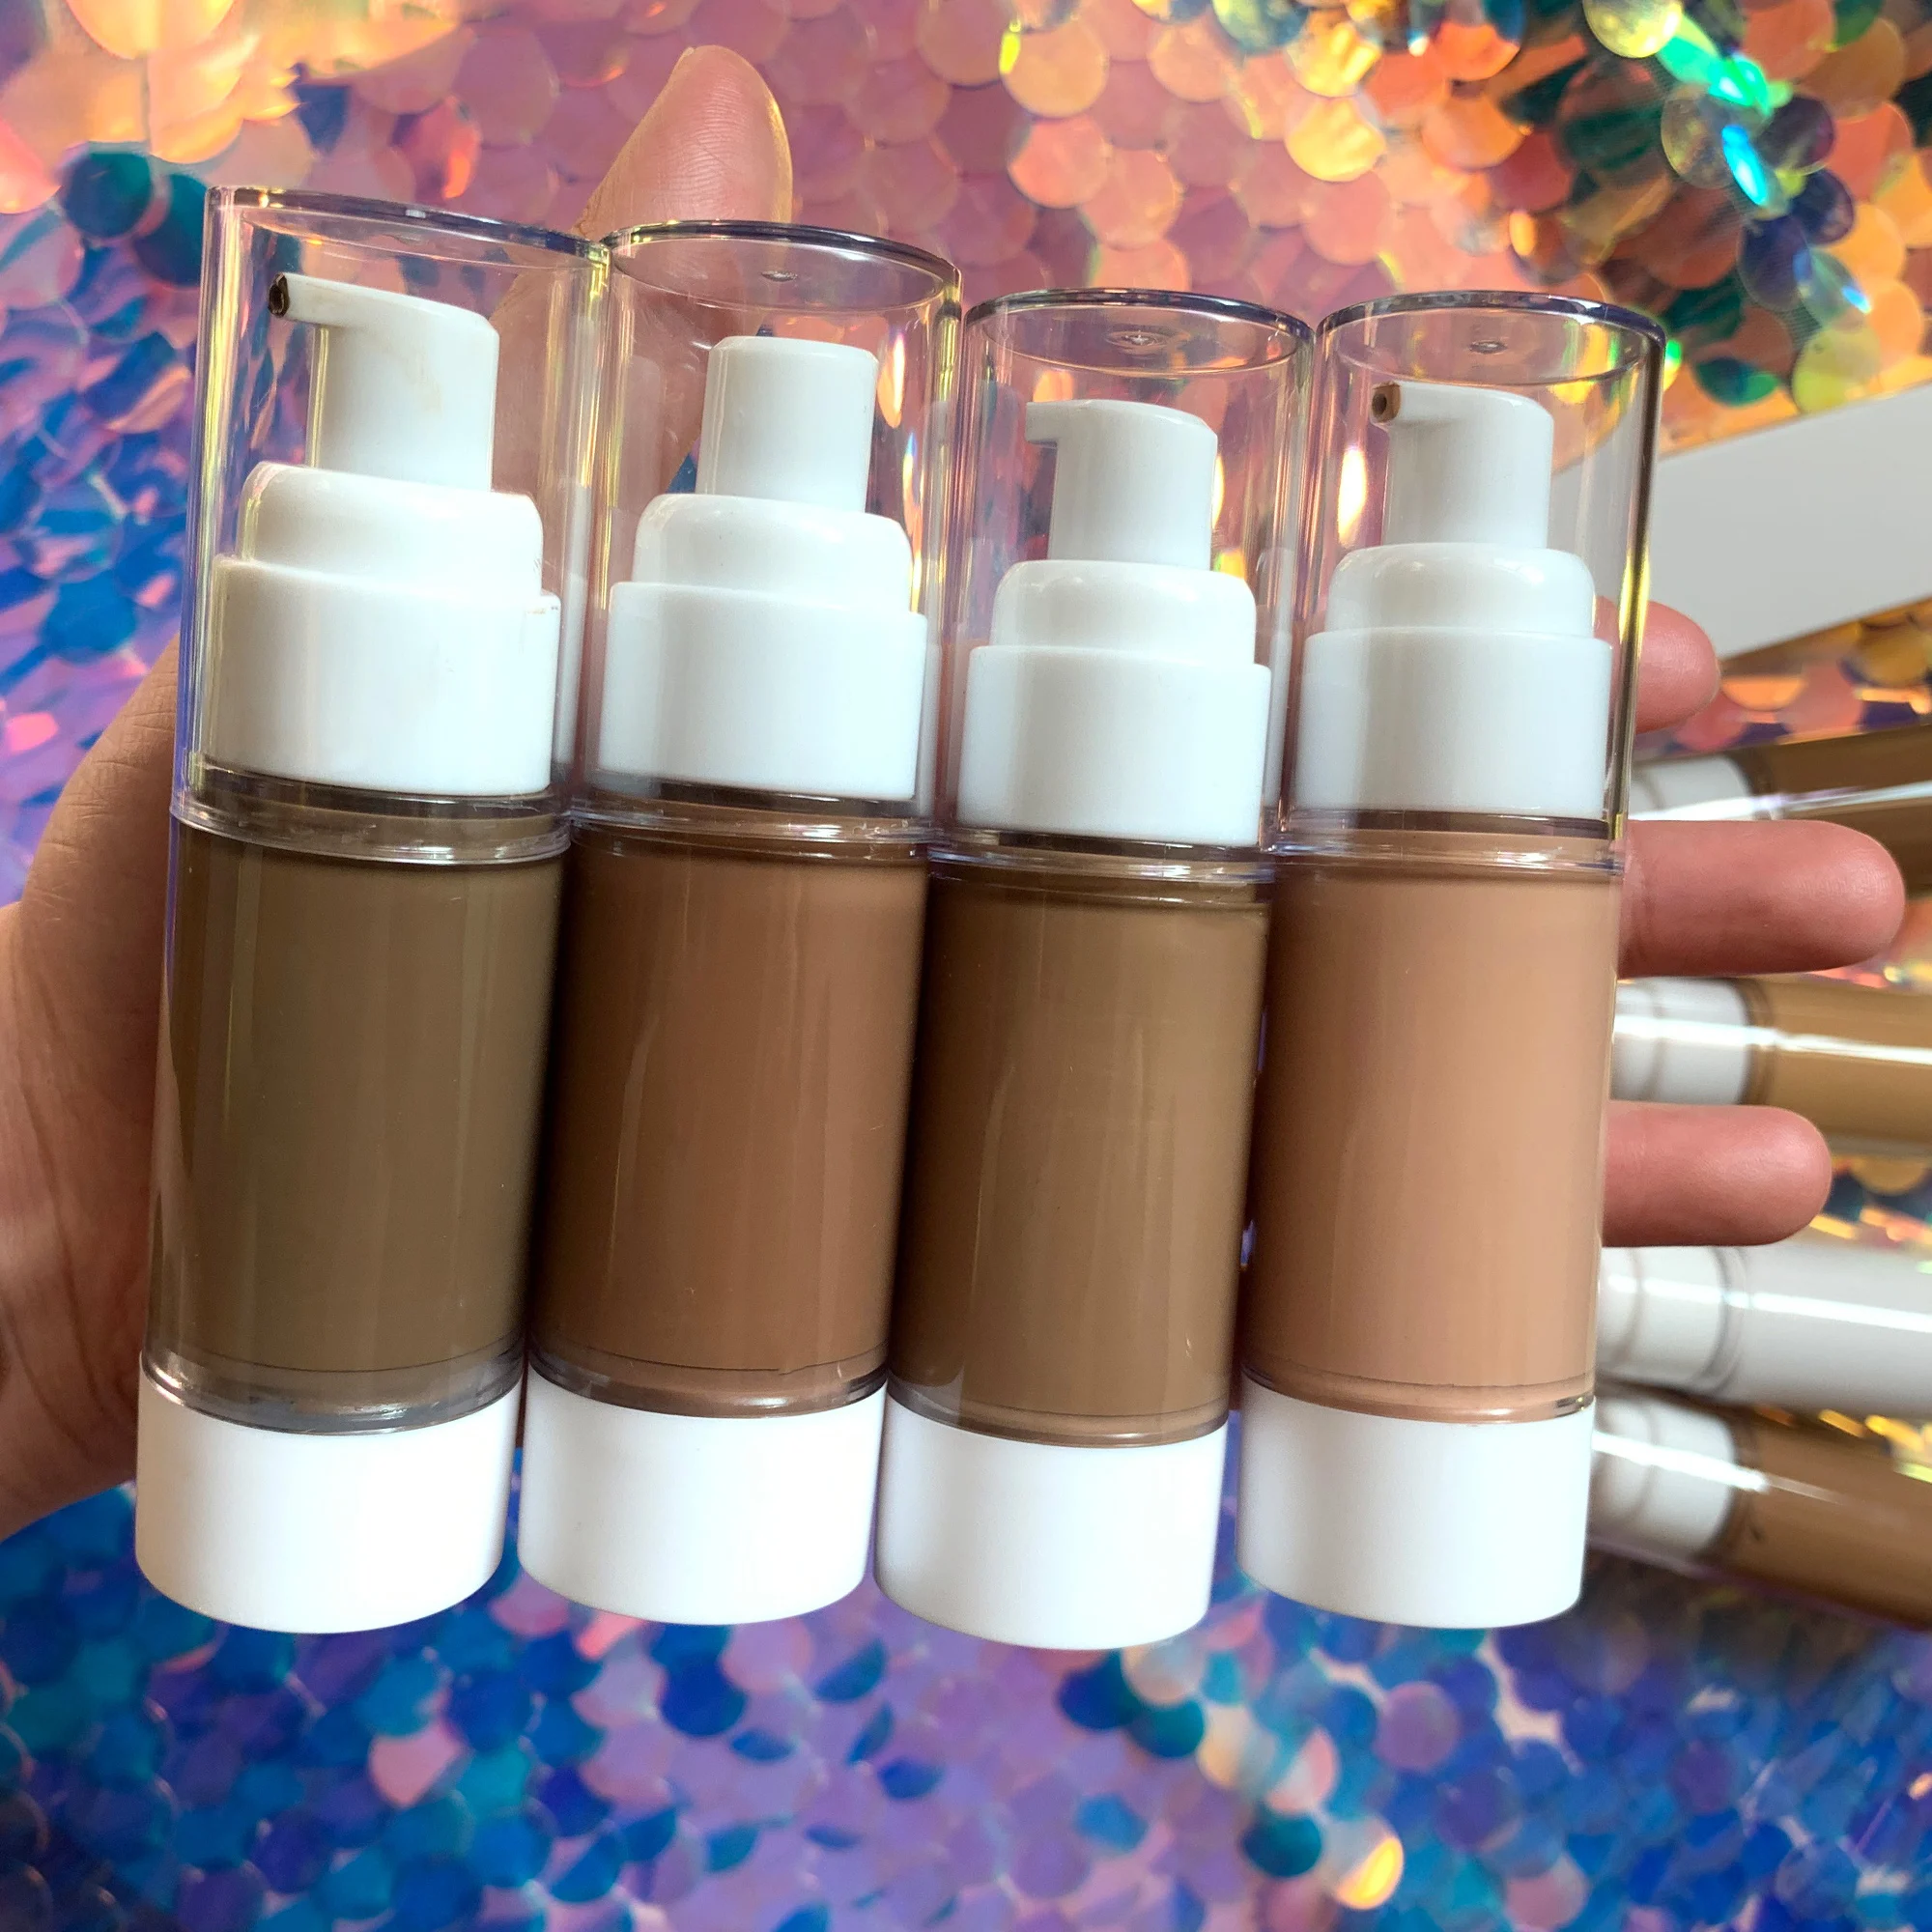 

popular low moq private label Make Your Own Brand Makeup Waterproof Liquid Foundation